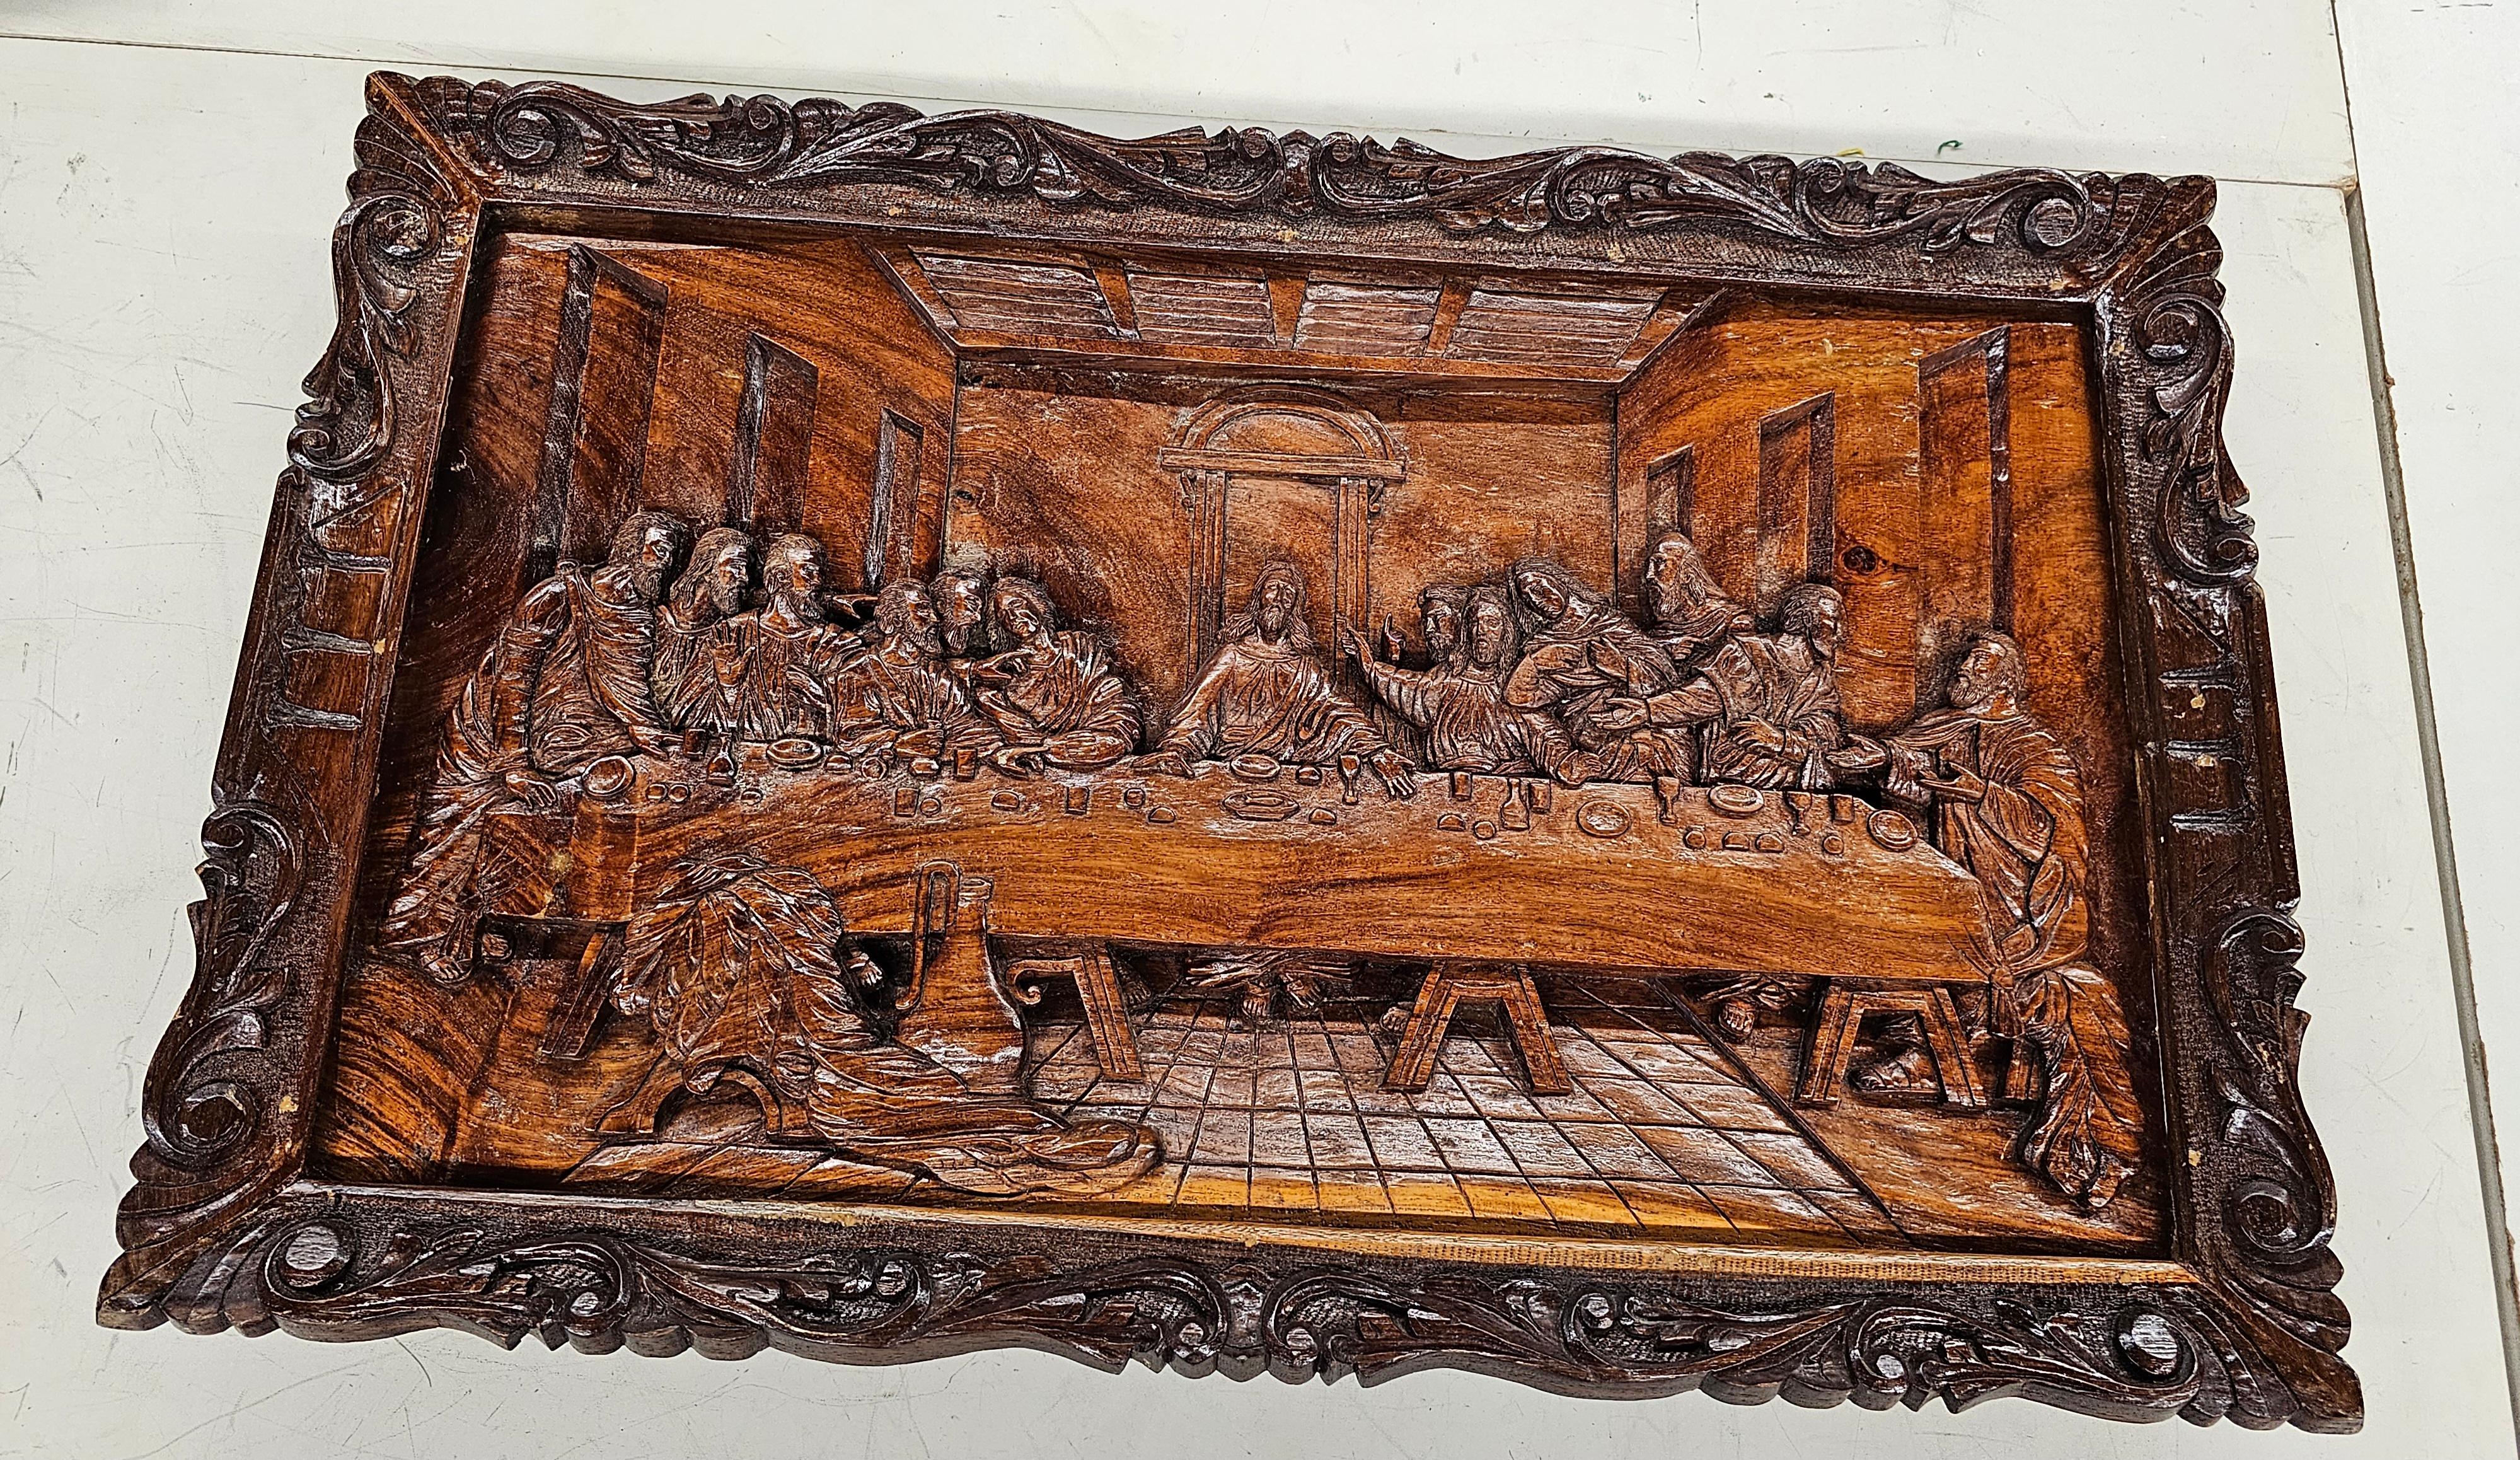 Early 20th Century Exceptional Framed Hand-Carved Wood Relief of the Last Super.
Continental tropical baroque heavy solid wood frame, carved by a master carver. The piece has elaborately carved opulent heavy foliage frame around a meticulously hand